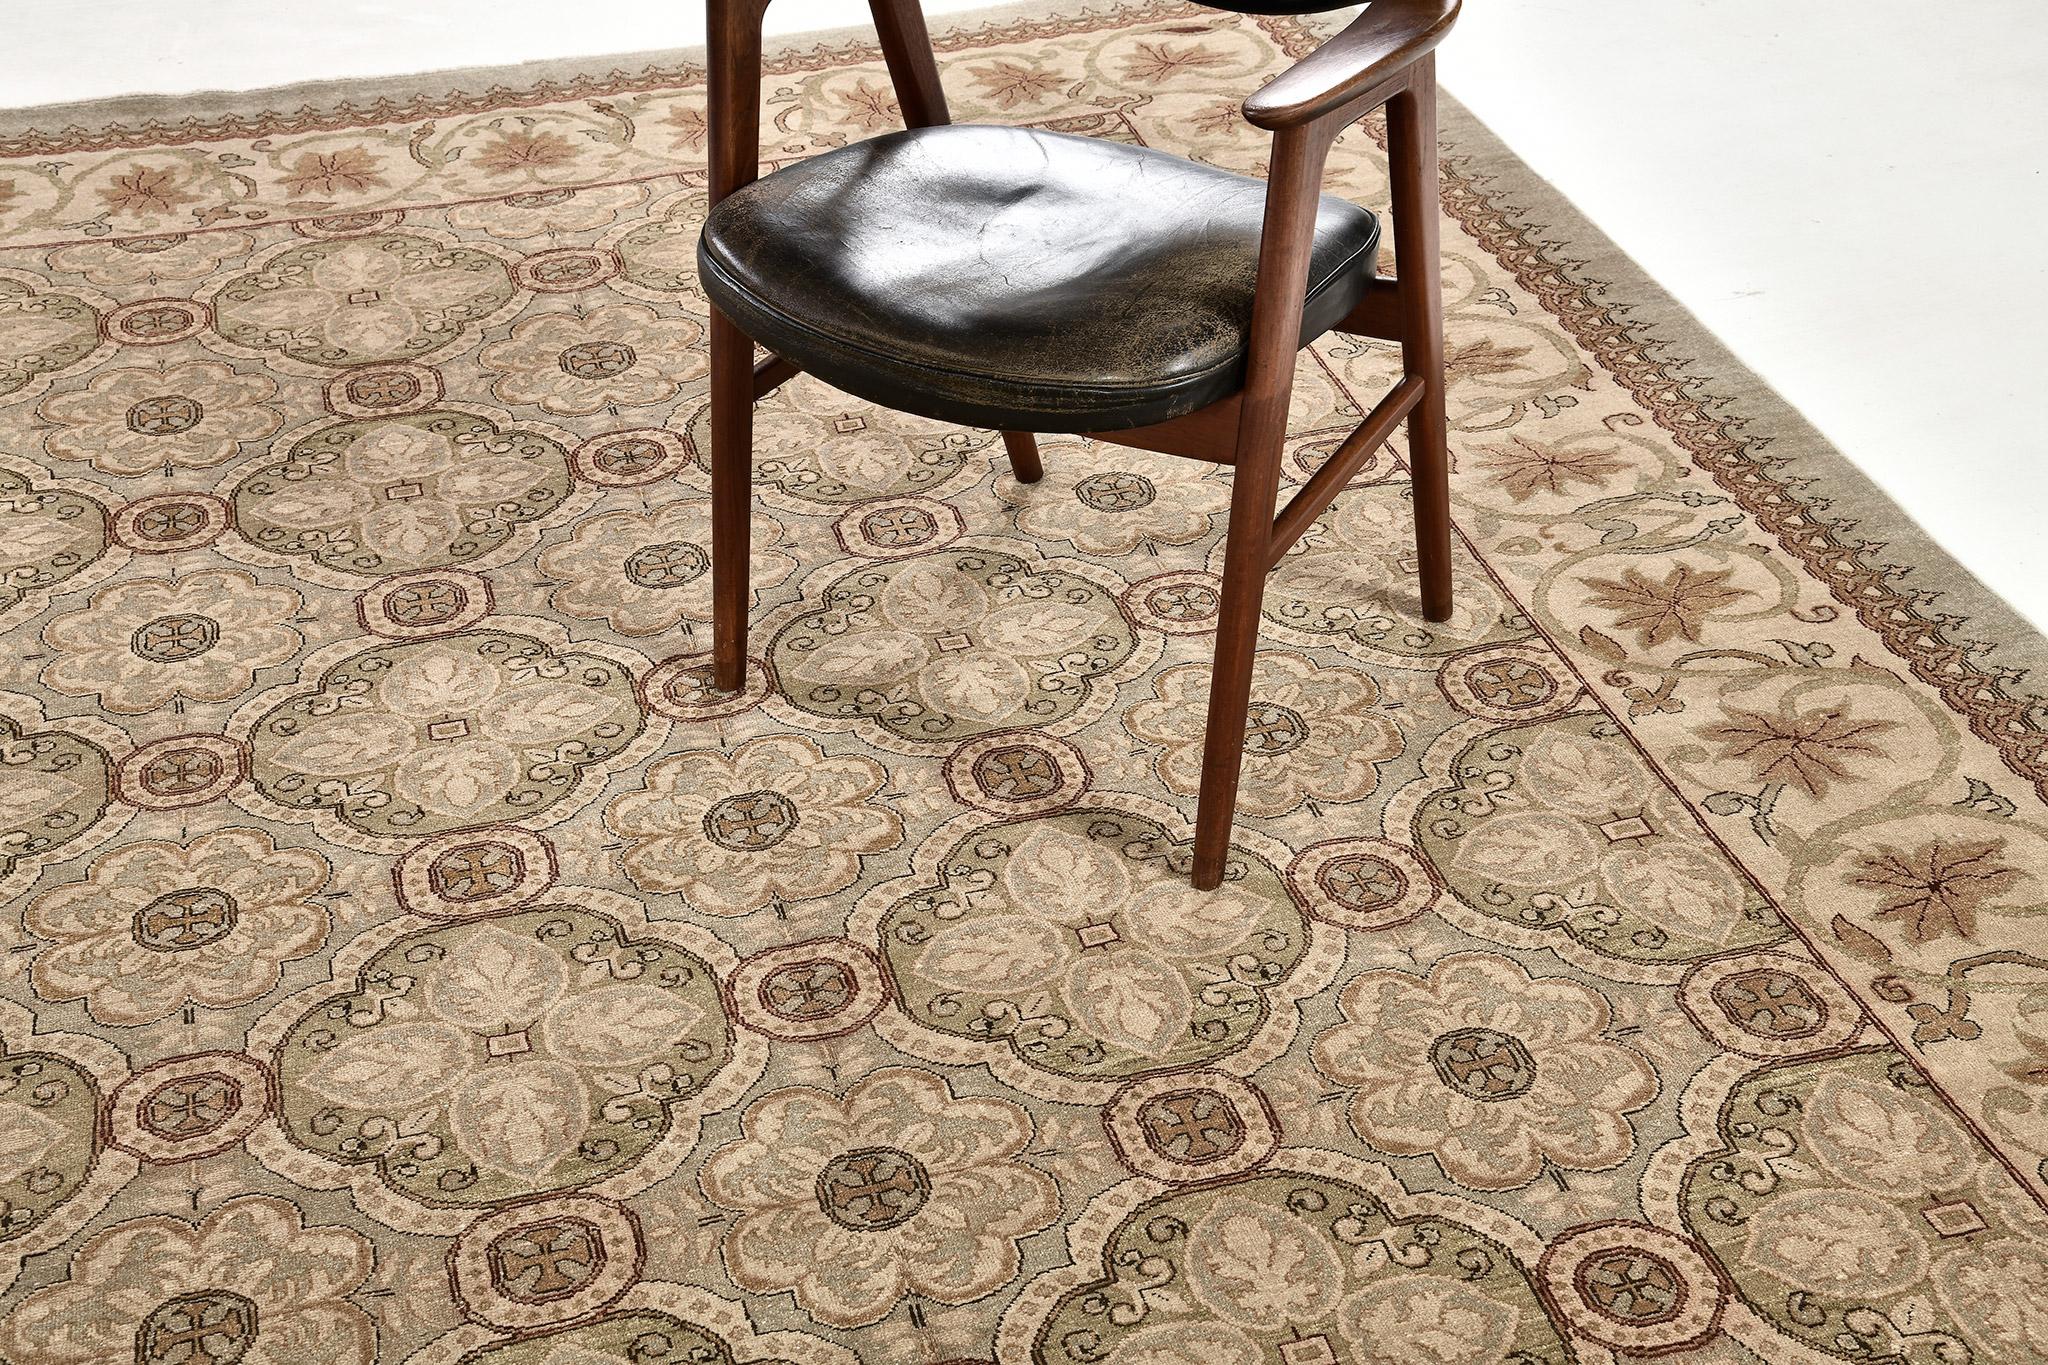 Highly stylish yet tastefully casual, this new Arts and Crafts Design Rug in Bliss Collection features an all-over raised pattern composed of alternating floral motifs in a panel design of botanical elements that clearly reminds every viewer of an